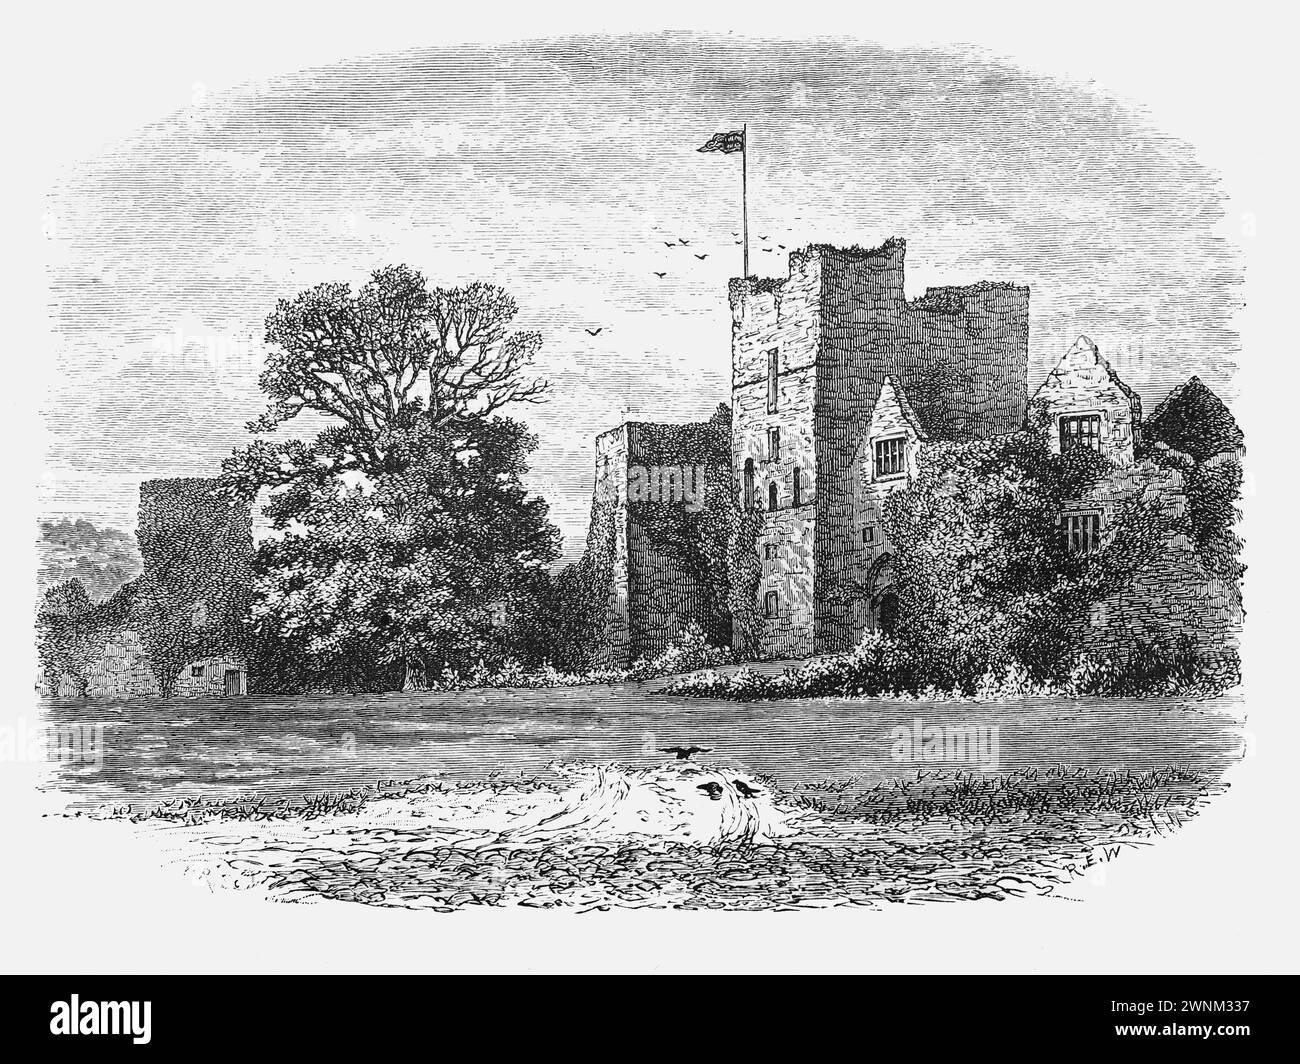 Ludlow Castle in the 19th century; Black and white illustration from 'Our Own Country' a Descriptive, Historical and Pictorial guide to the UK published in late 1880s by Cassell, Petter, Galpin & Co. Historic pictures of Briatin. Stock Photo